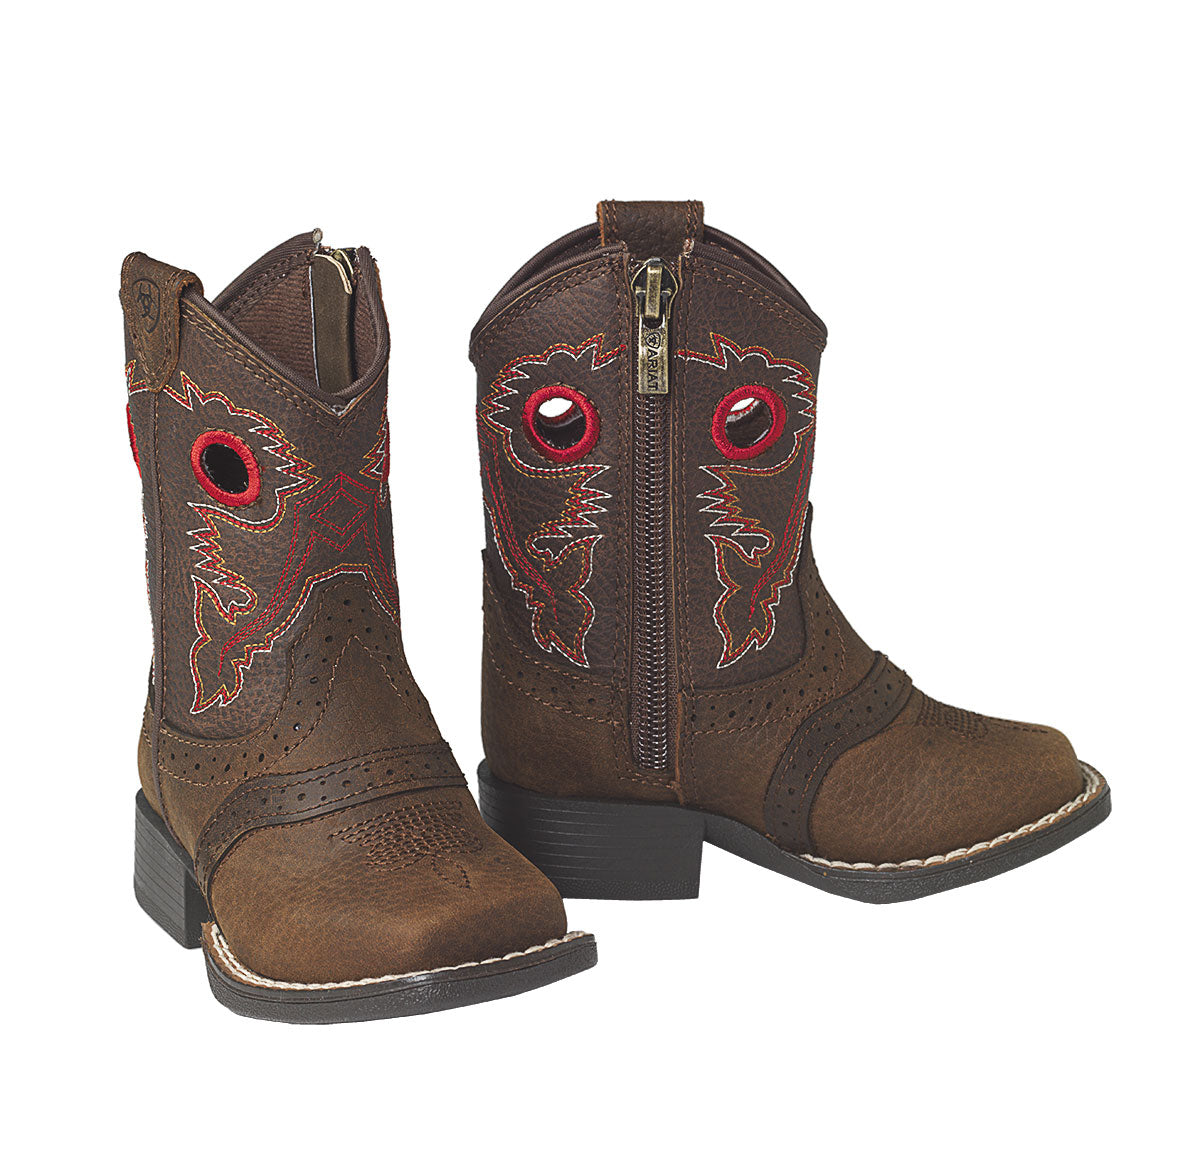 Ariat Heritage Rough Stock Toddler Boots